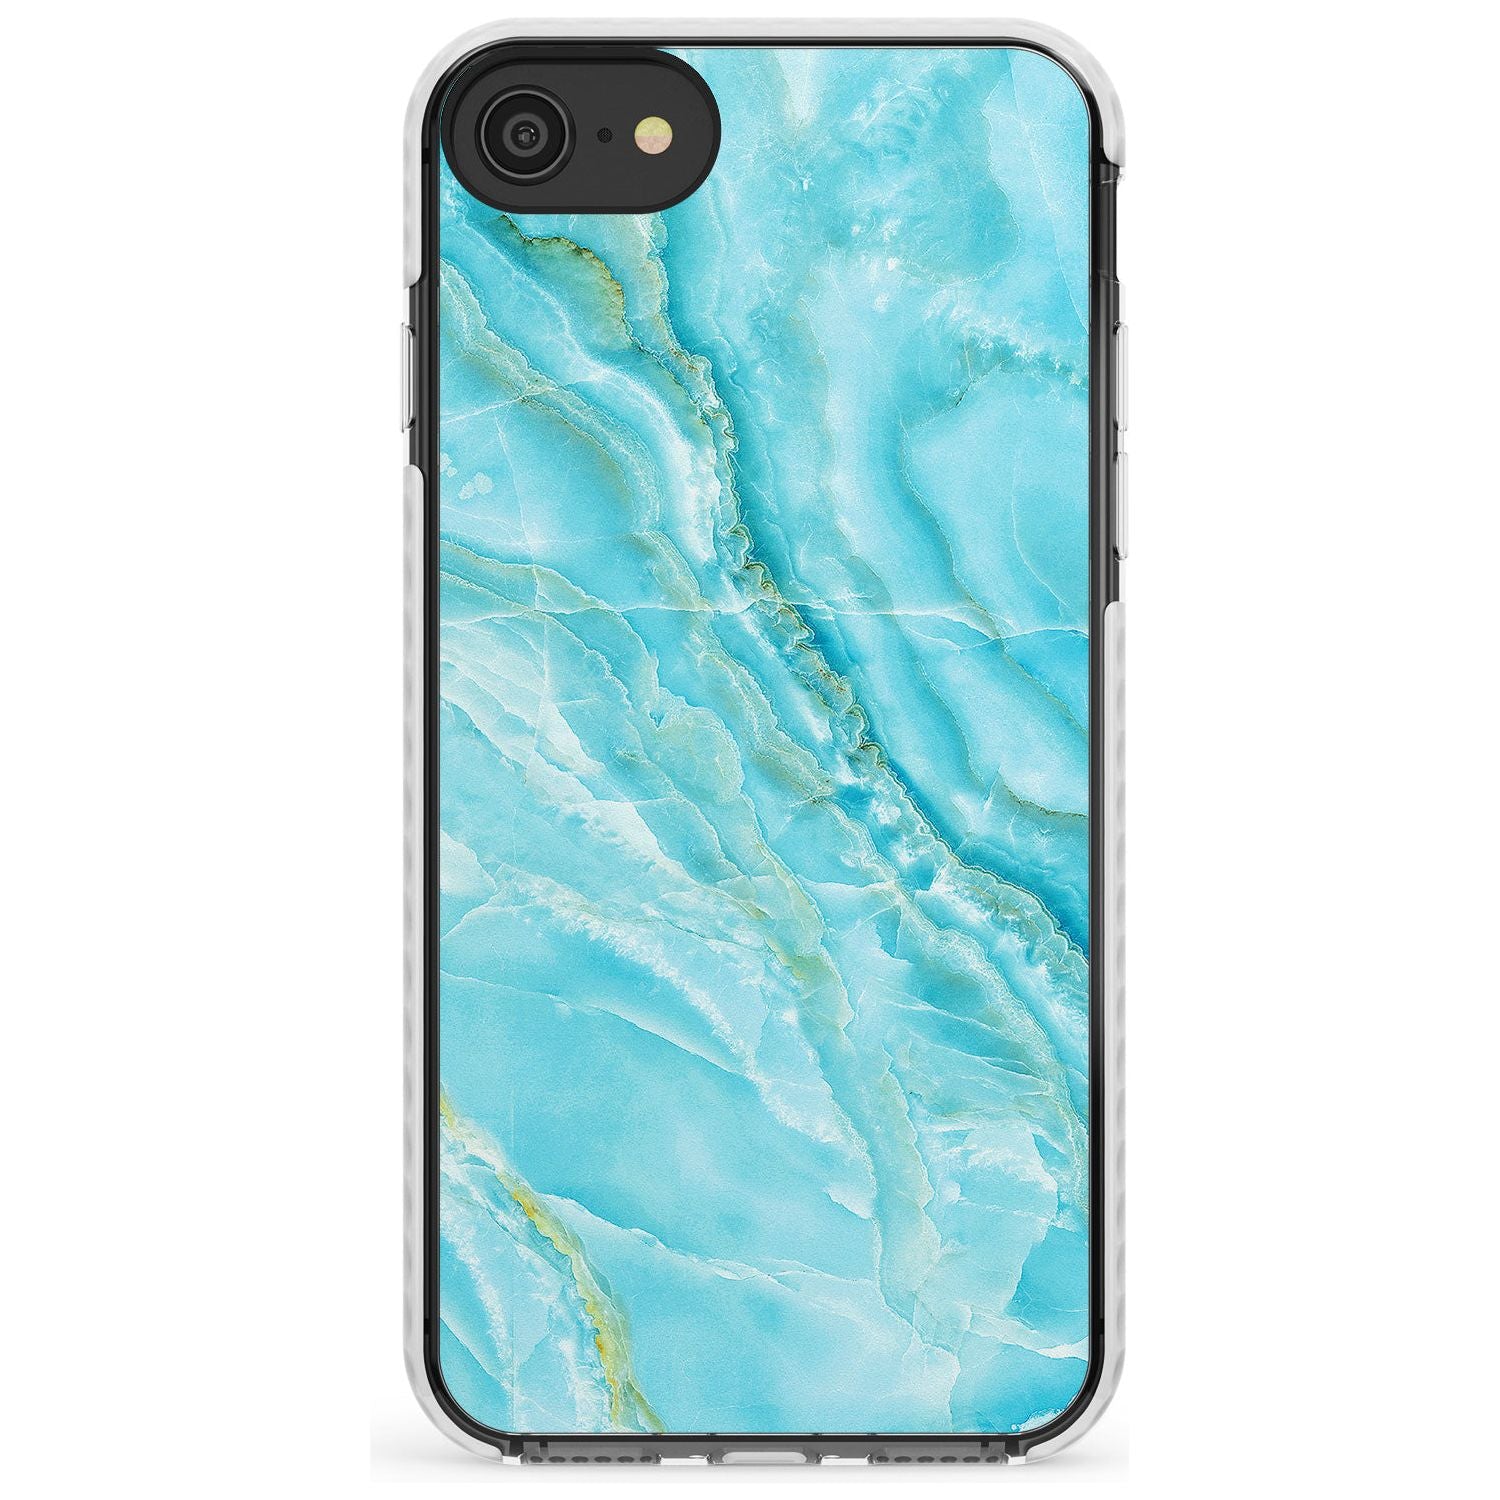 Bright Blue Onyx Marble Texture Slim TPU Phone Case for iPhone SE 8 7 Plus